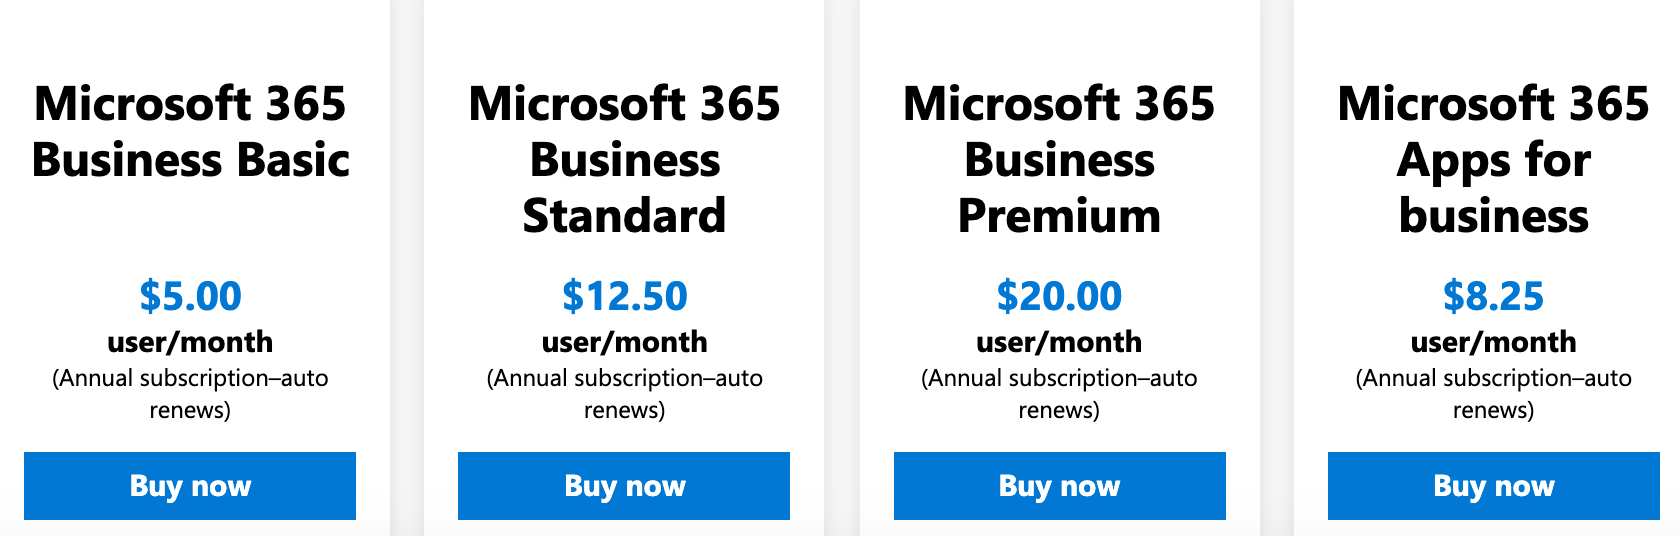 Black friday saas deal - Microsoft Office 365 personal deal